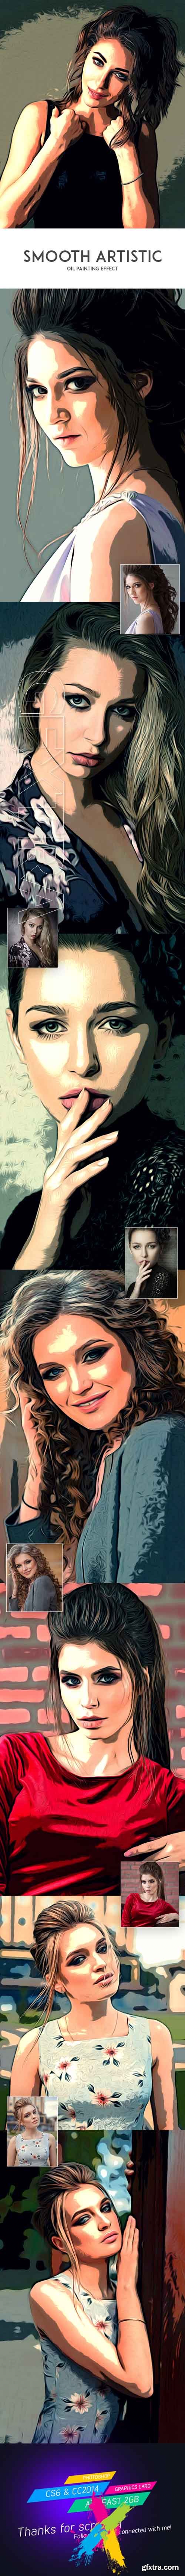 Graphicriver - Smooth Artistic Oil Painting Effect 20275394